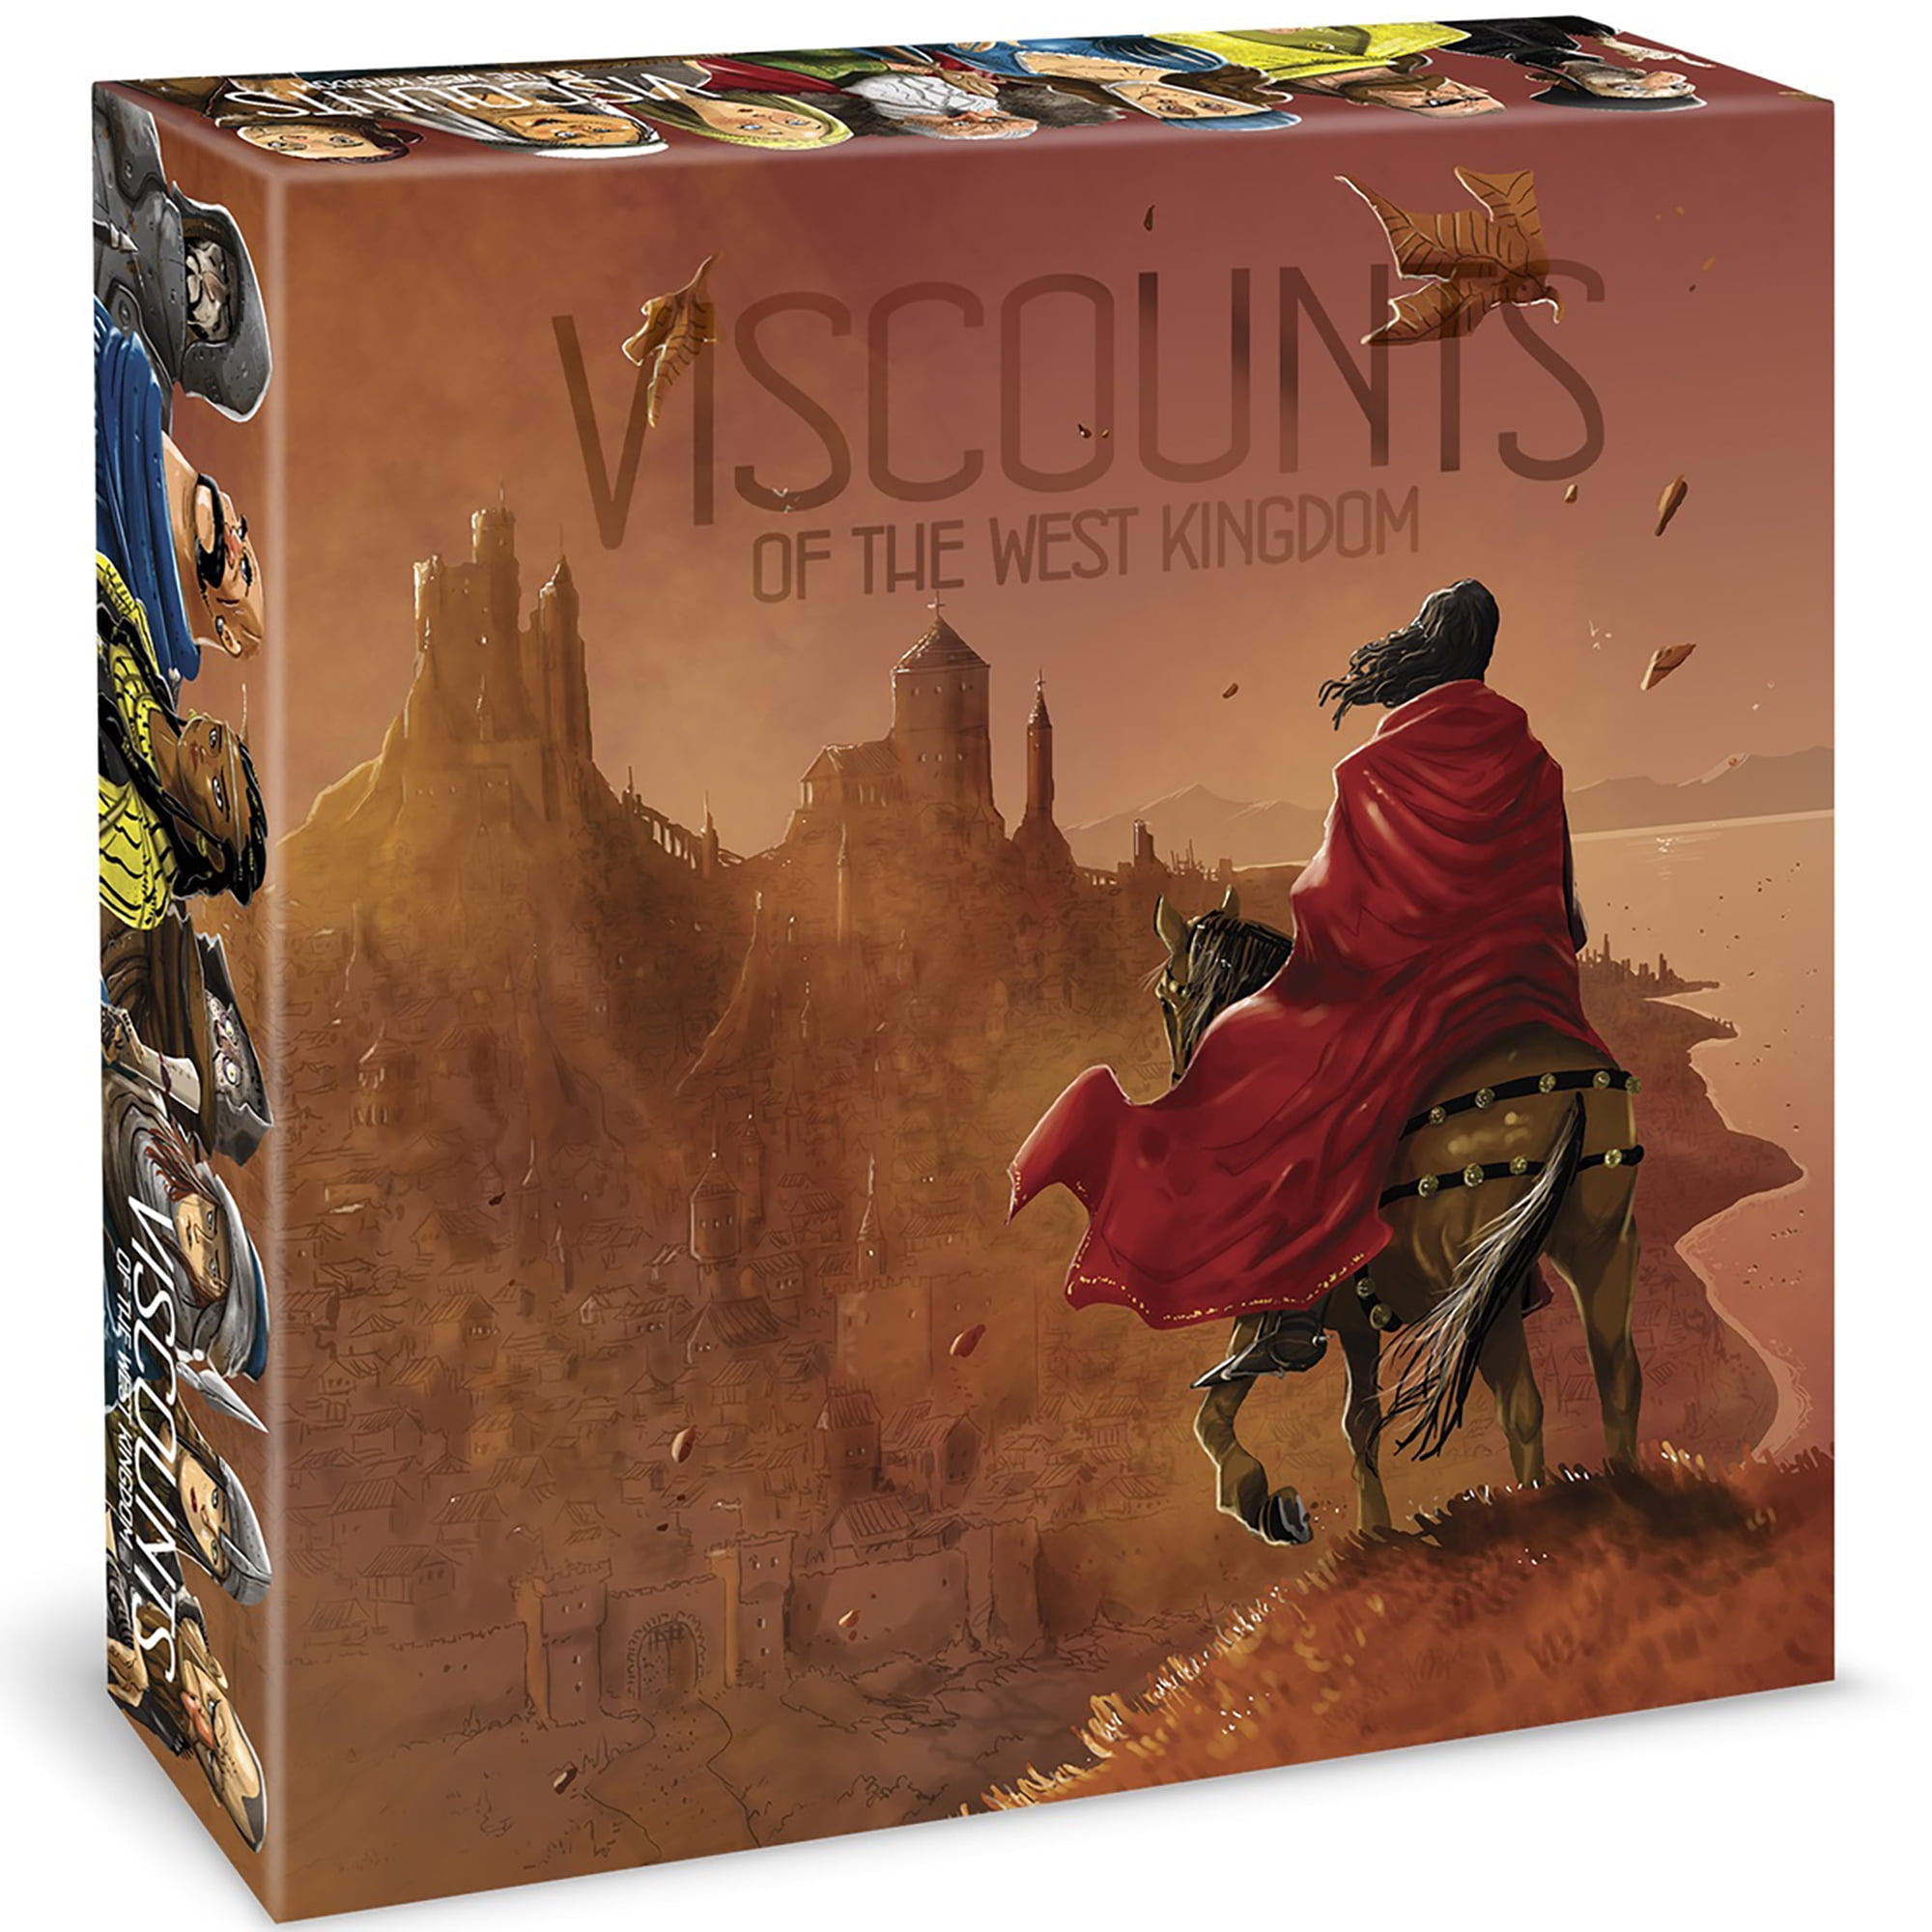 Picture of Renegade Game Studios REN02466 Viscounts of the West Kingdom - Collector Box